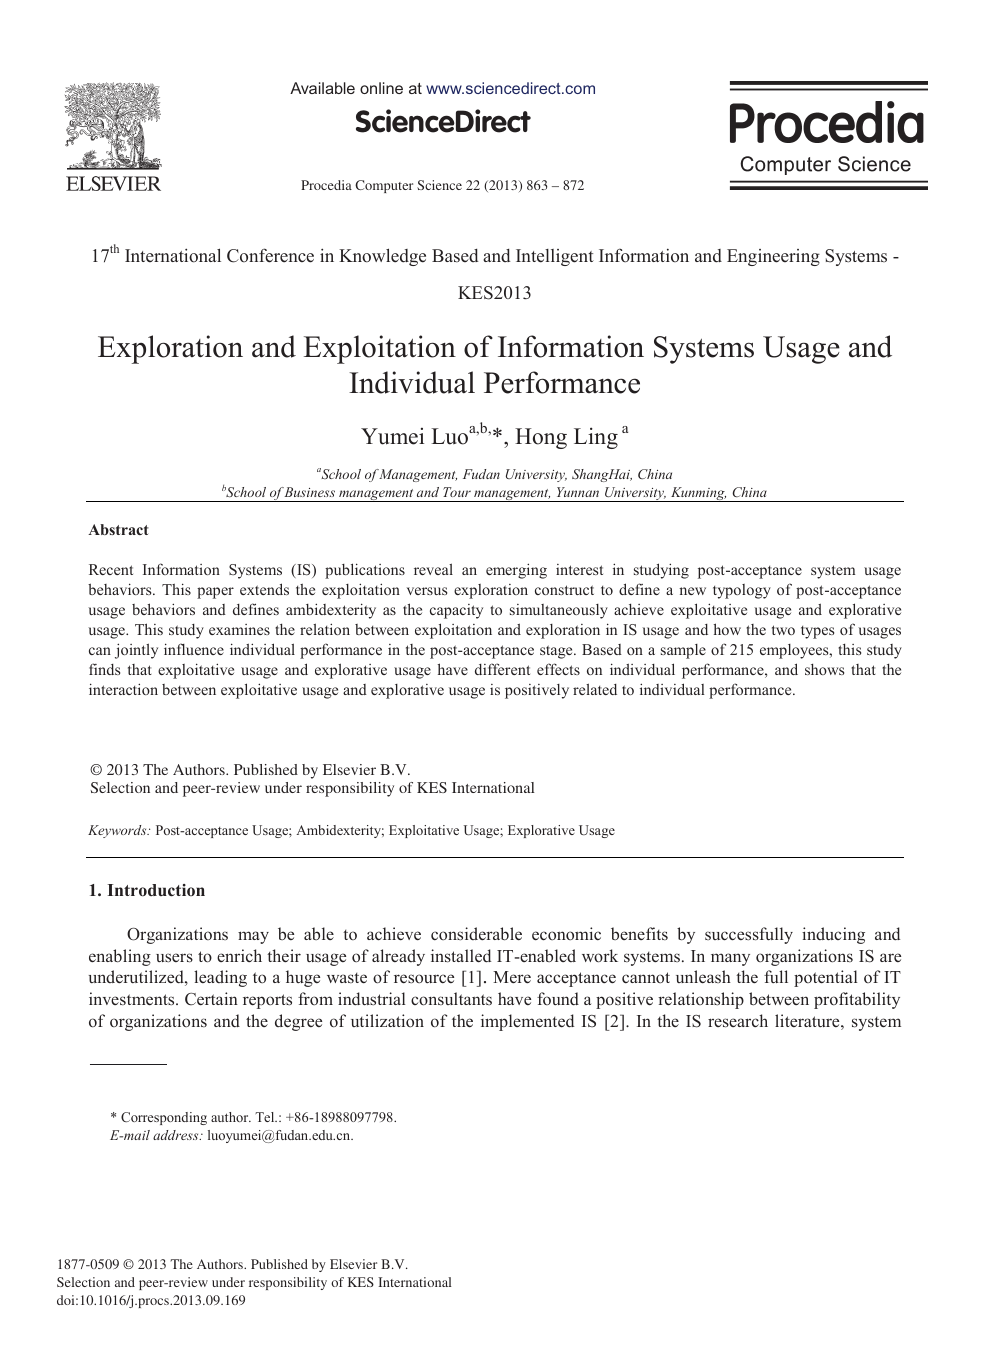 Exploration And Exploitation Of Information Systems Usage And